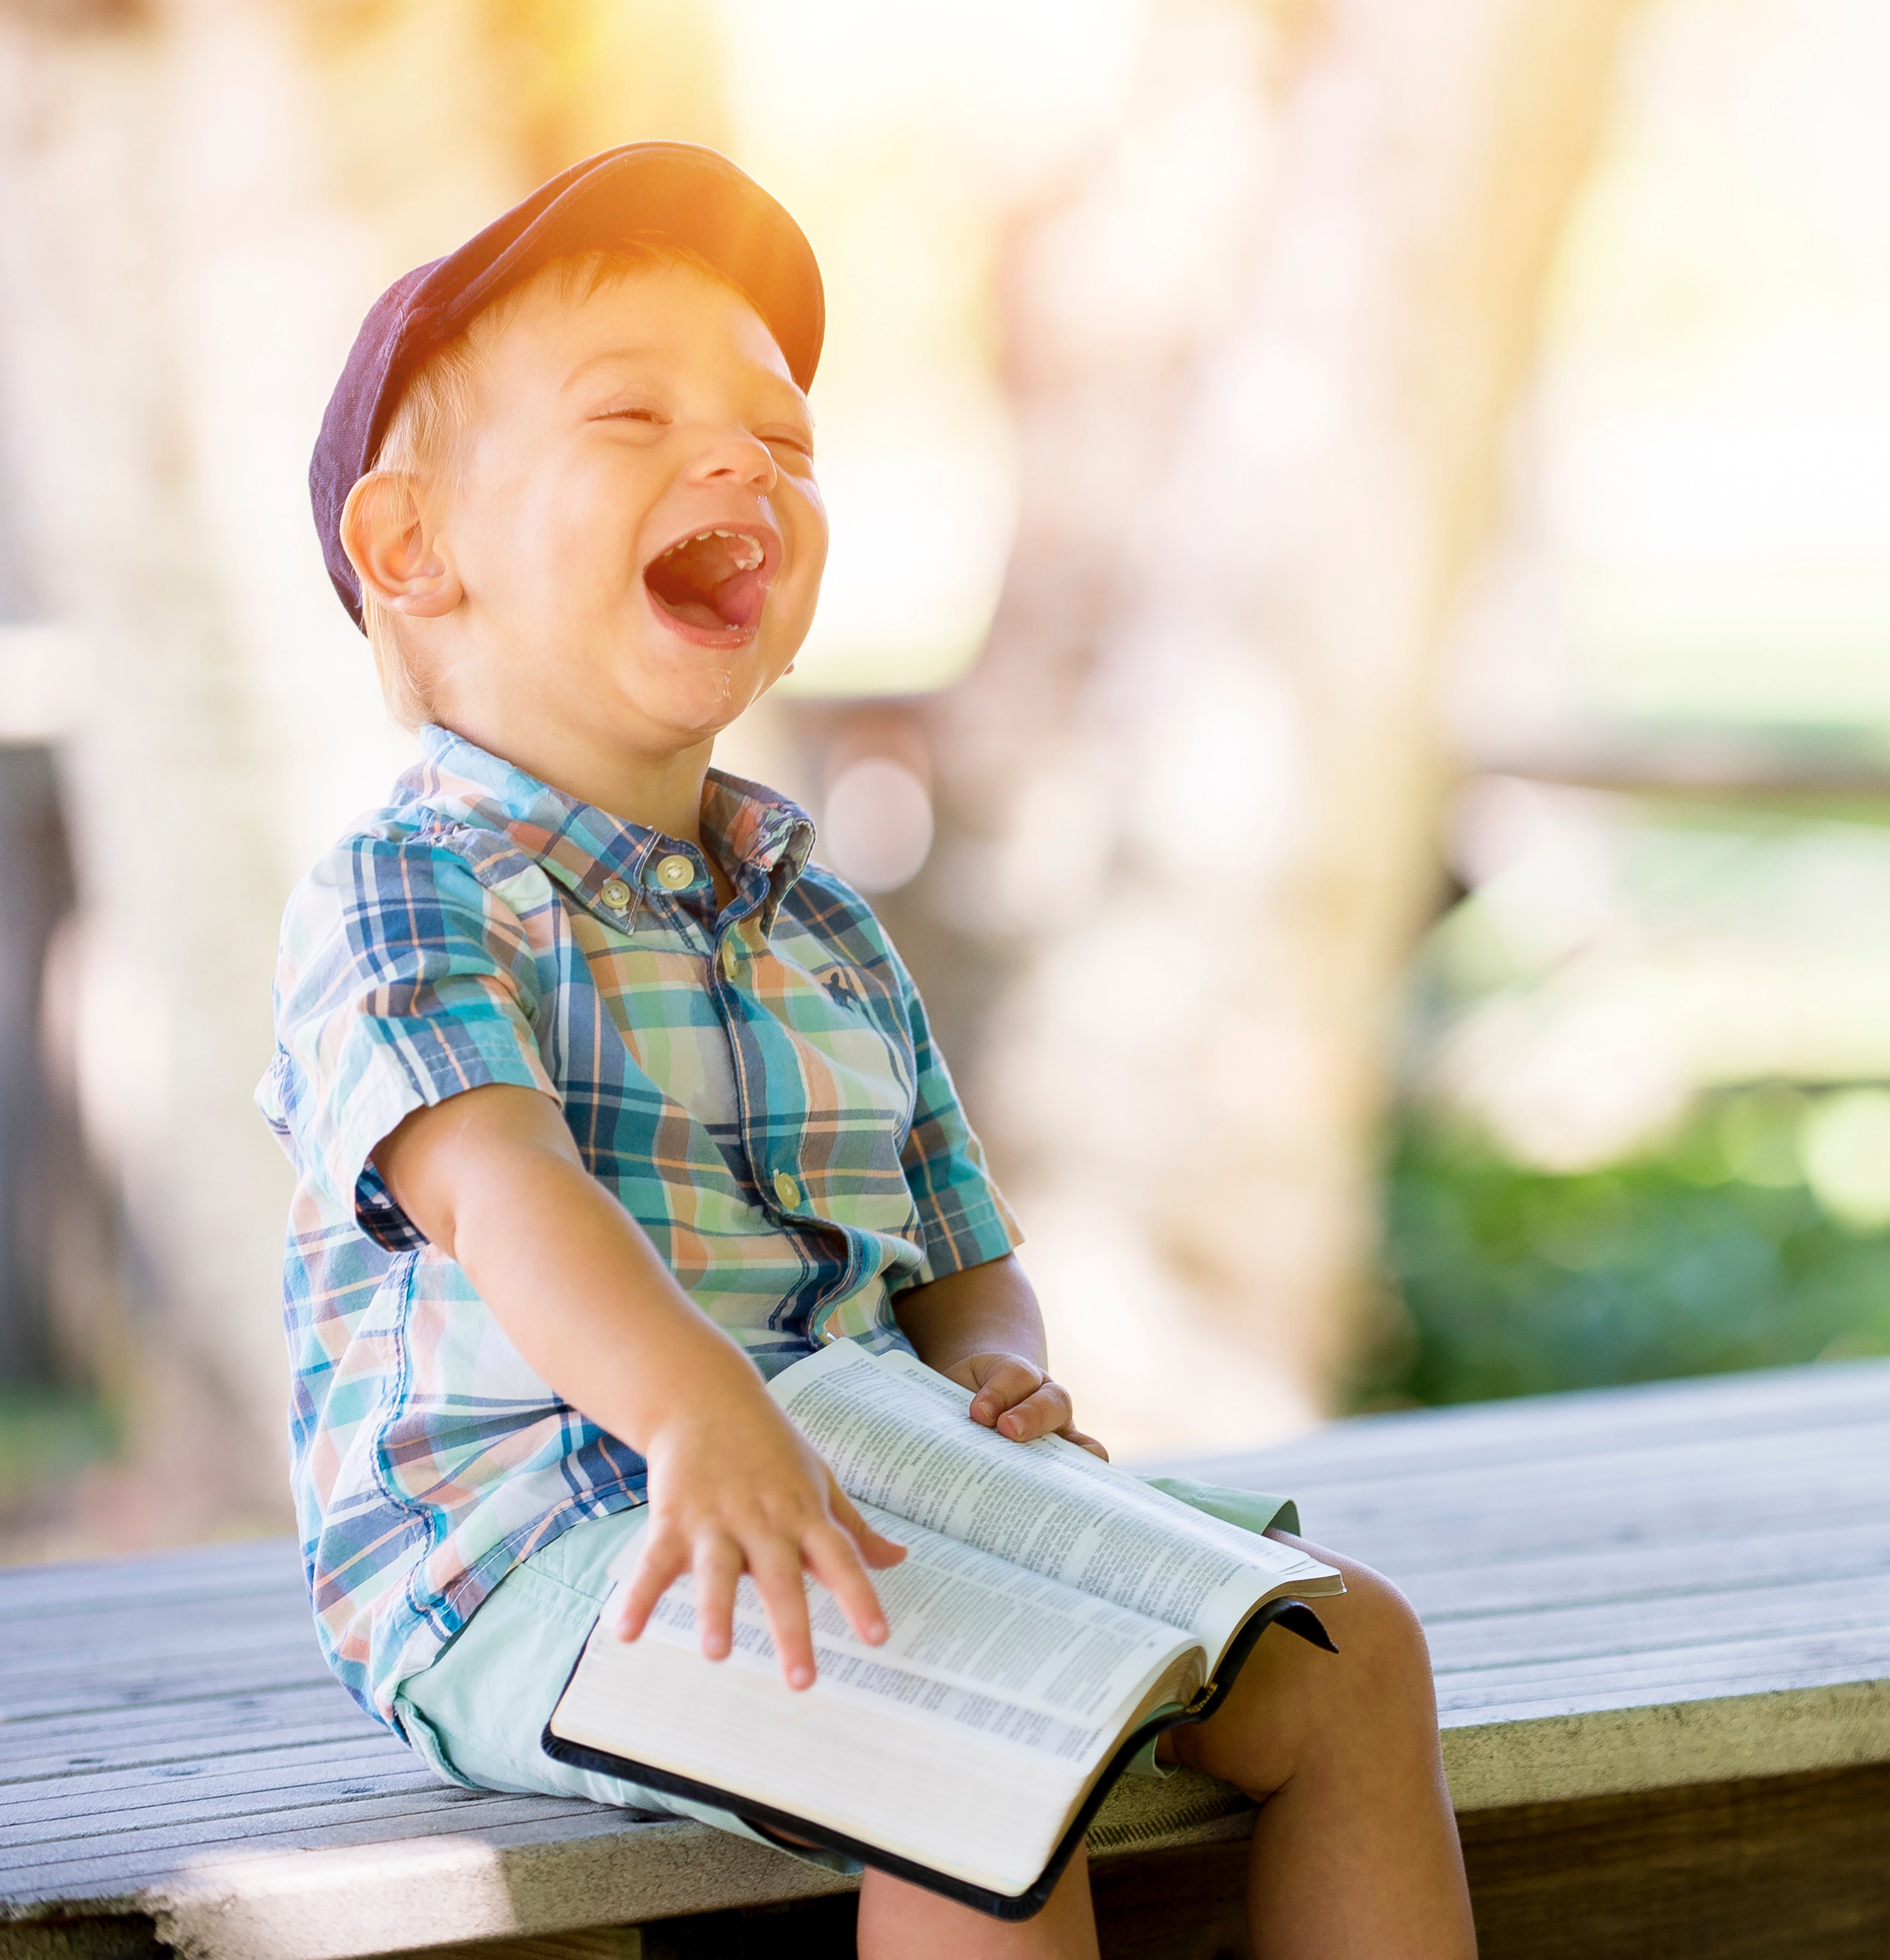 An image of a laughing child who is reading a book